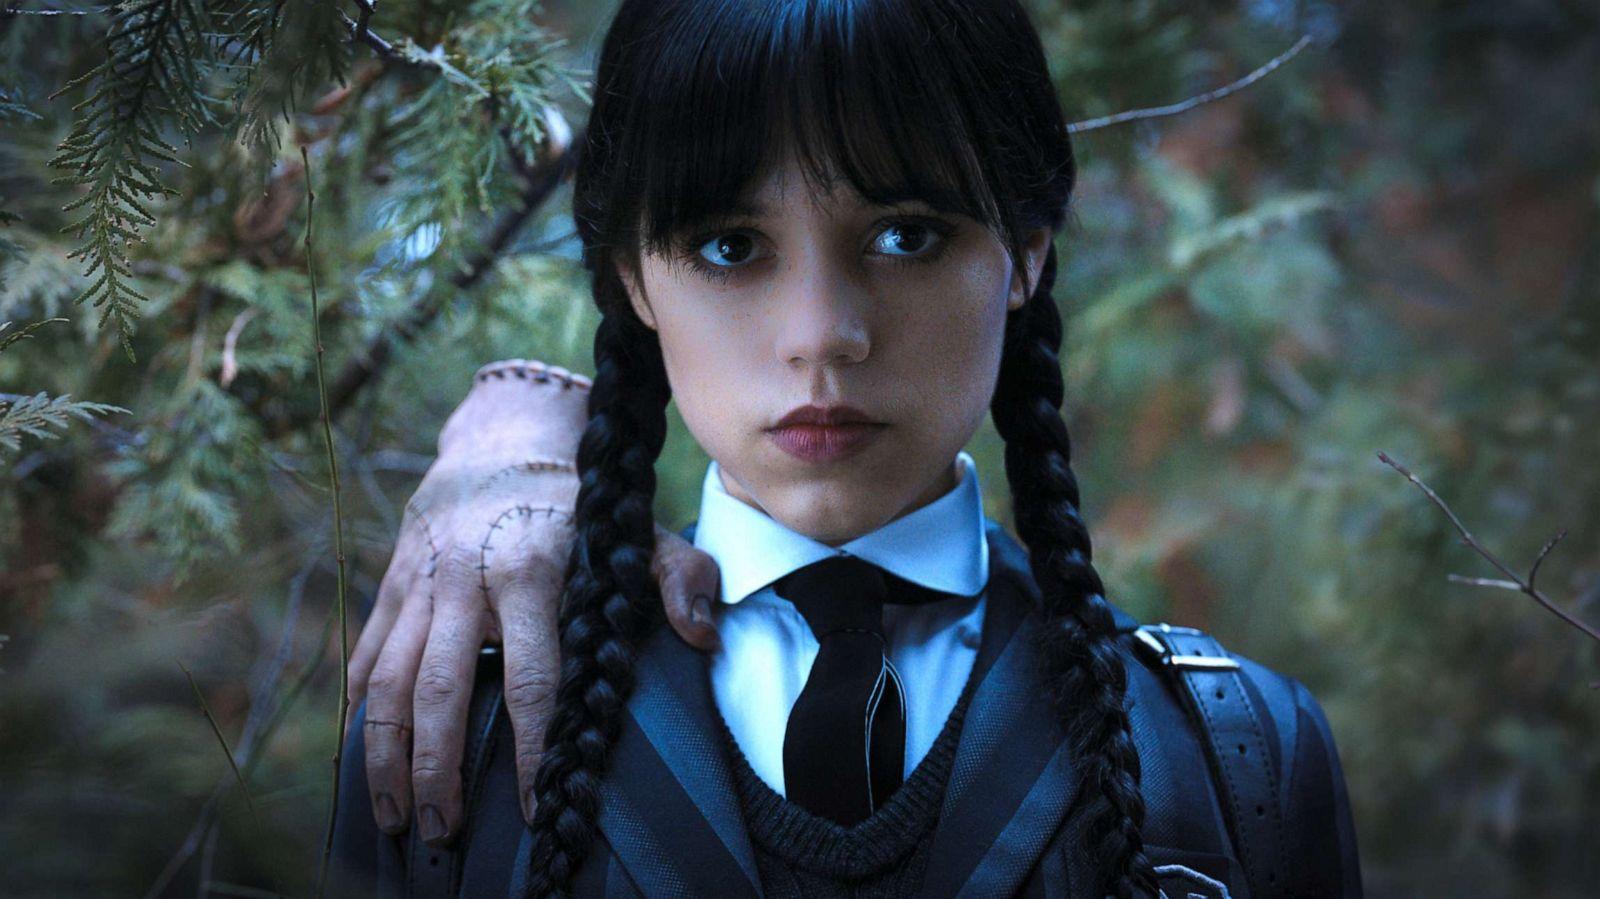 Wednesday Addams Gives Thing An Ultimatum In New Clip